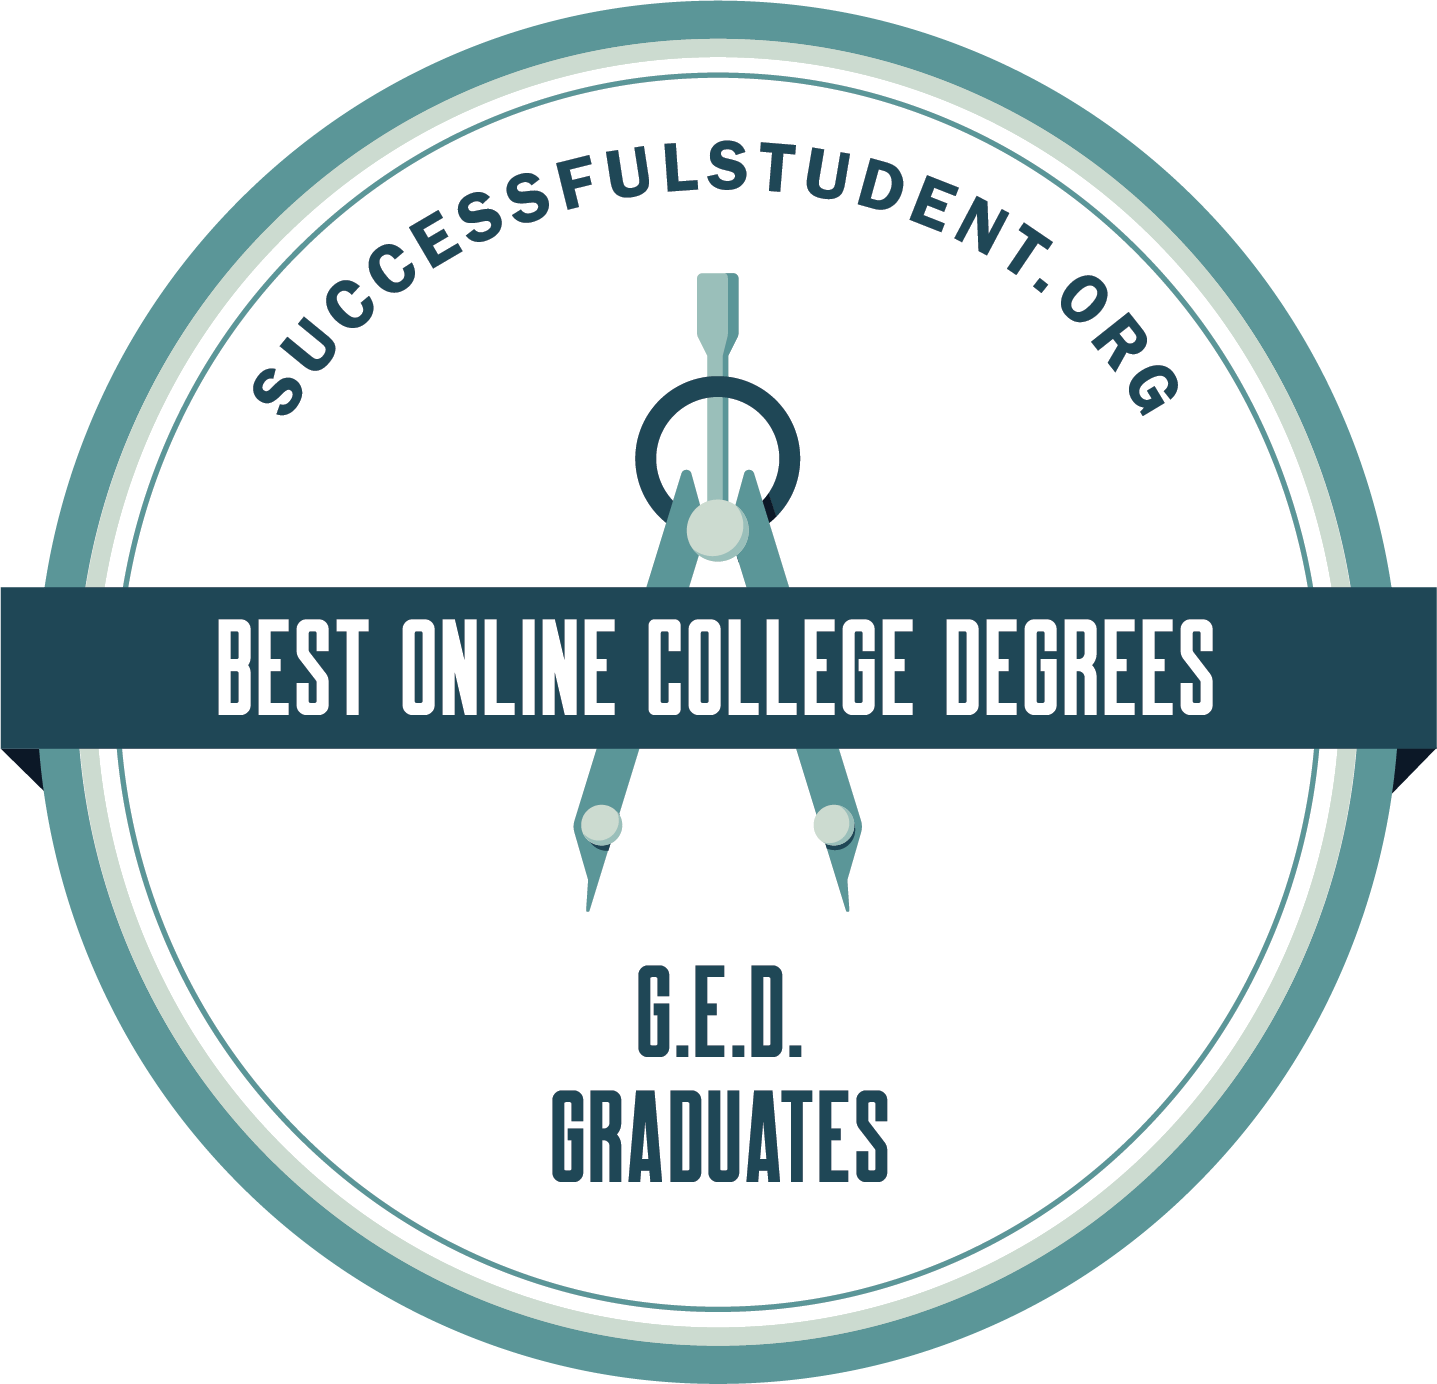 The Best Online College Degrees for GED Graduates's Badge